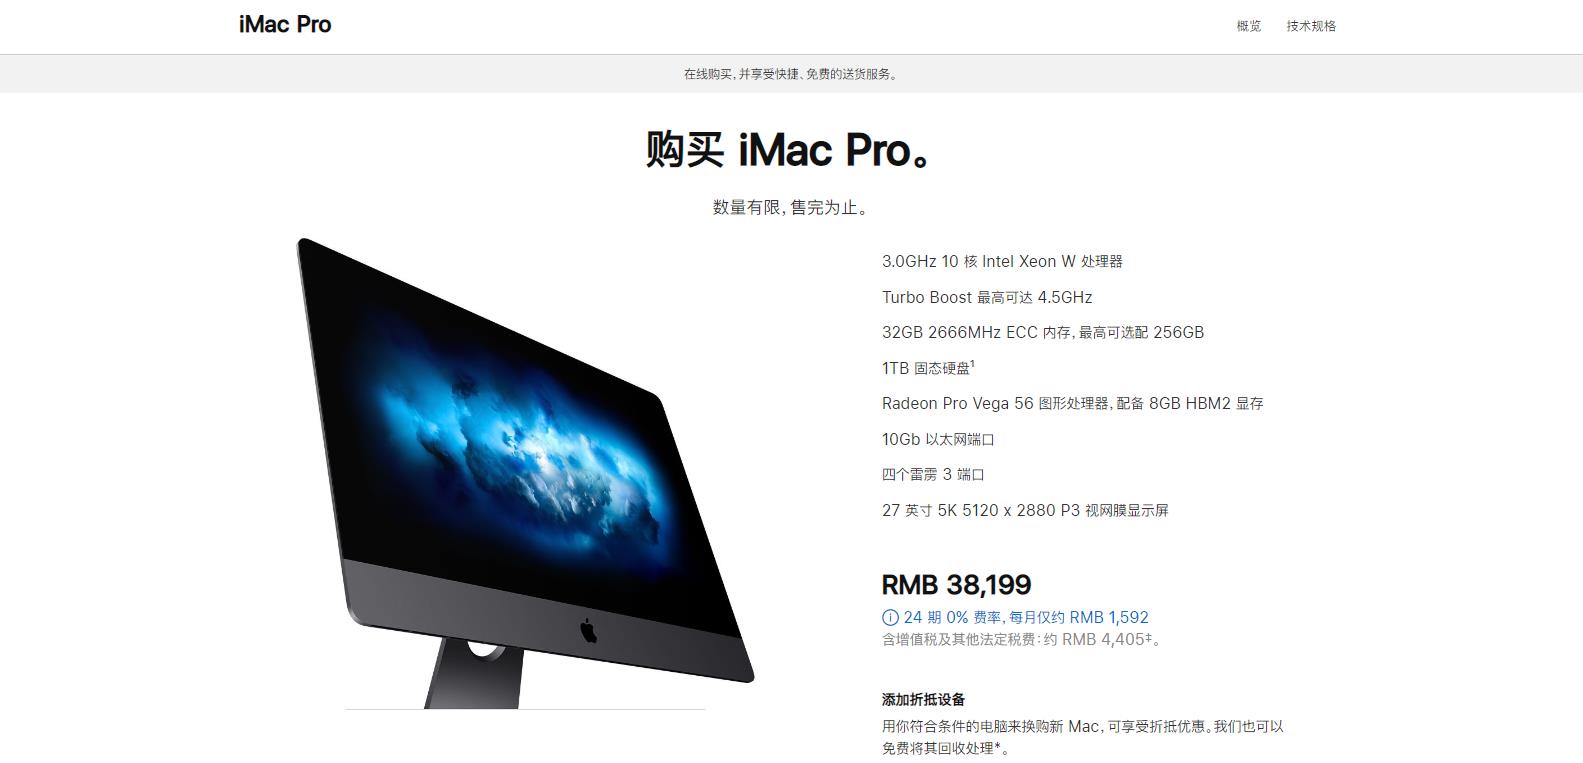 The government already confirmed: The apple will stop carry out IMac Pro